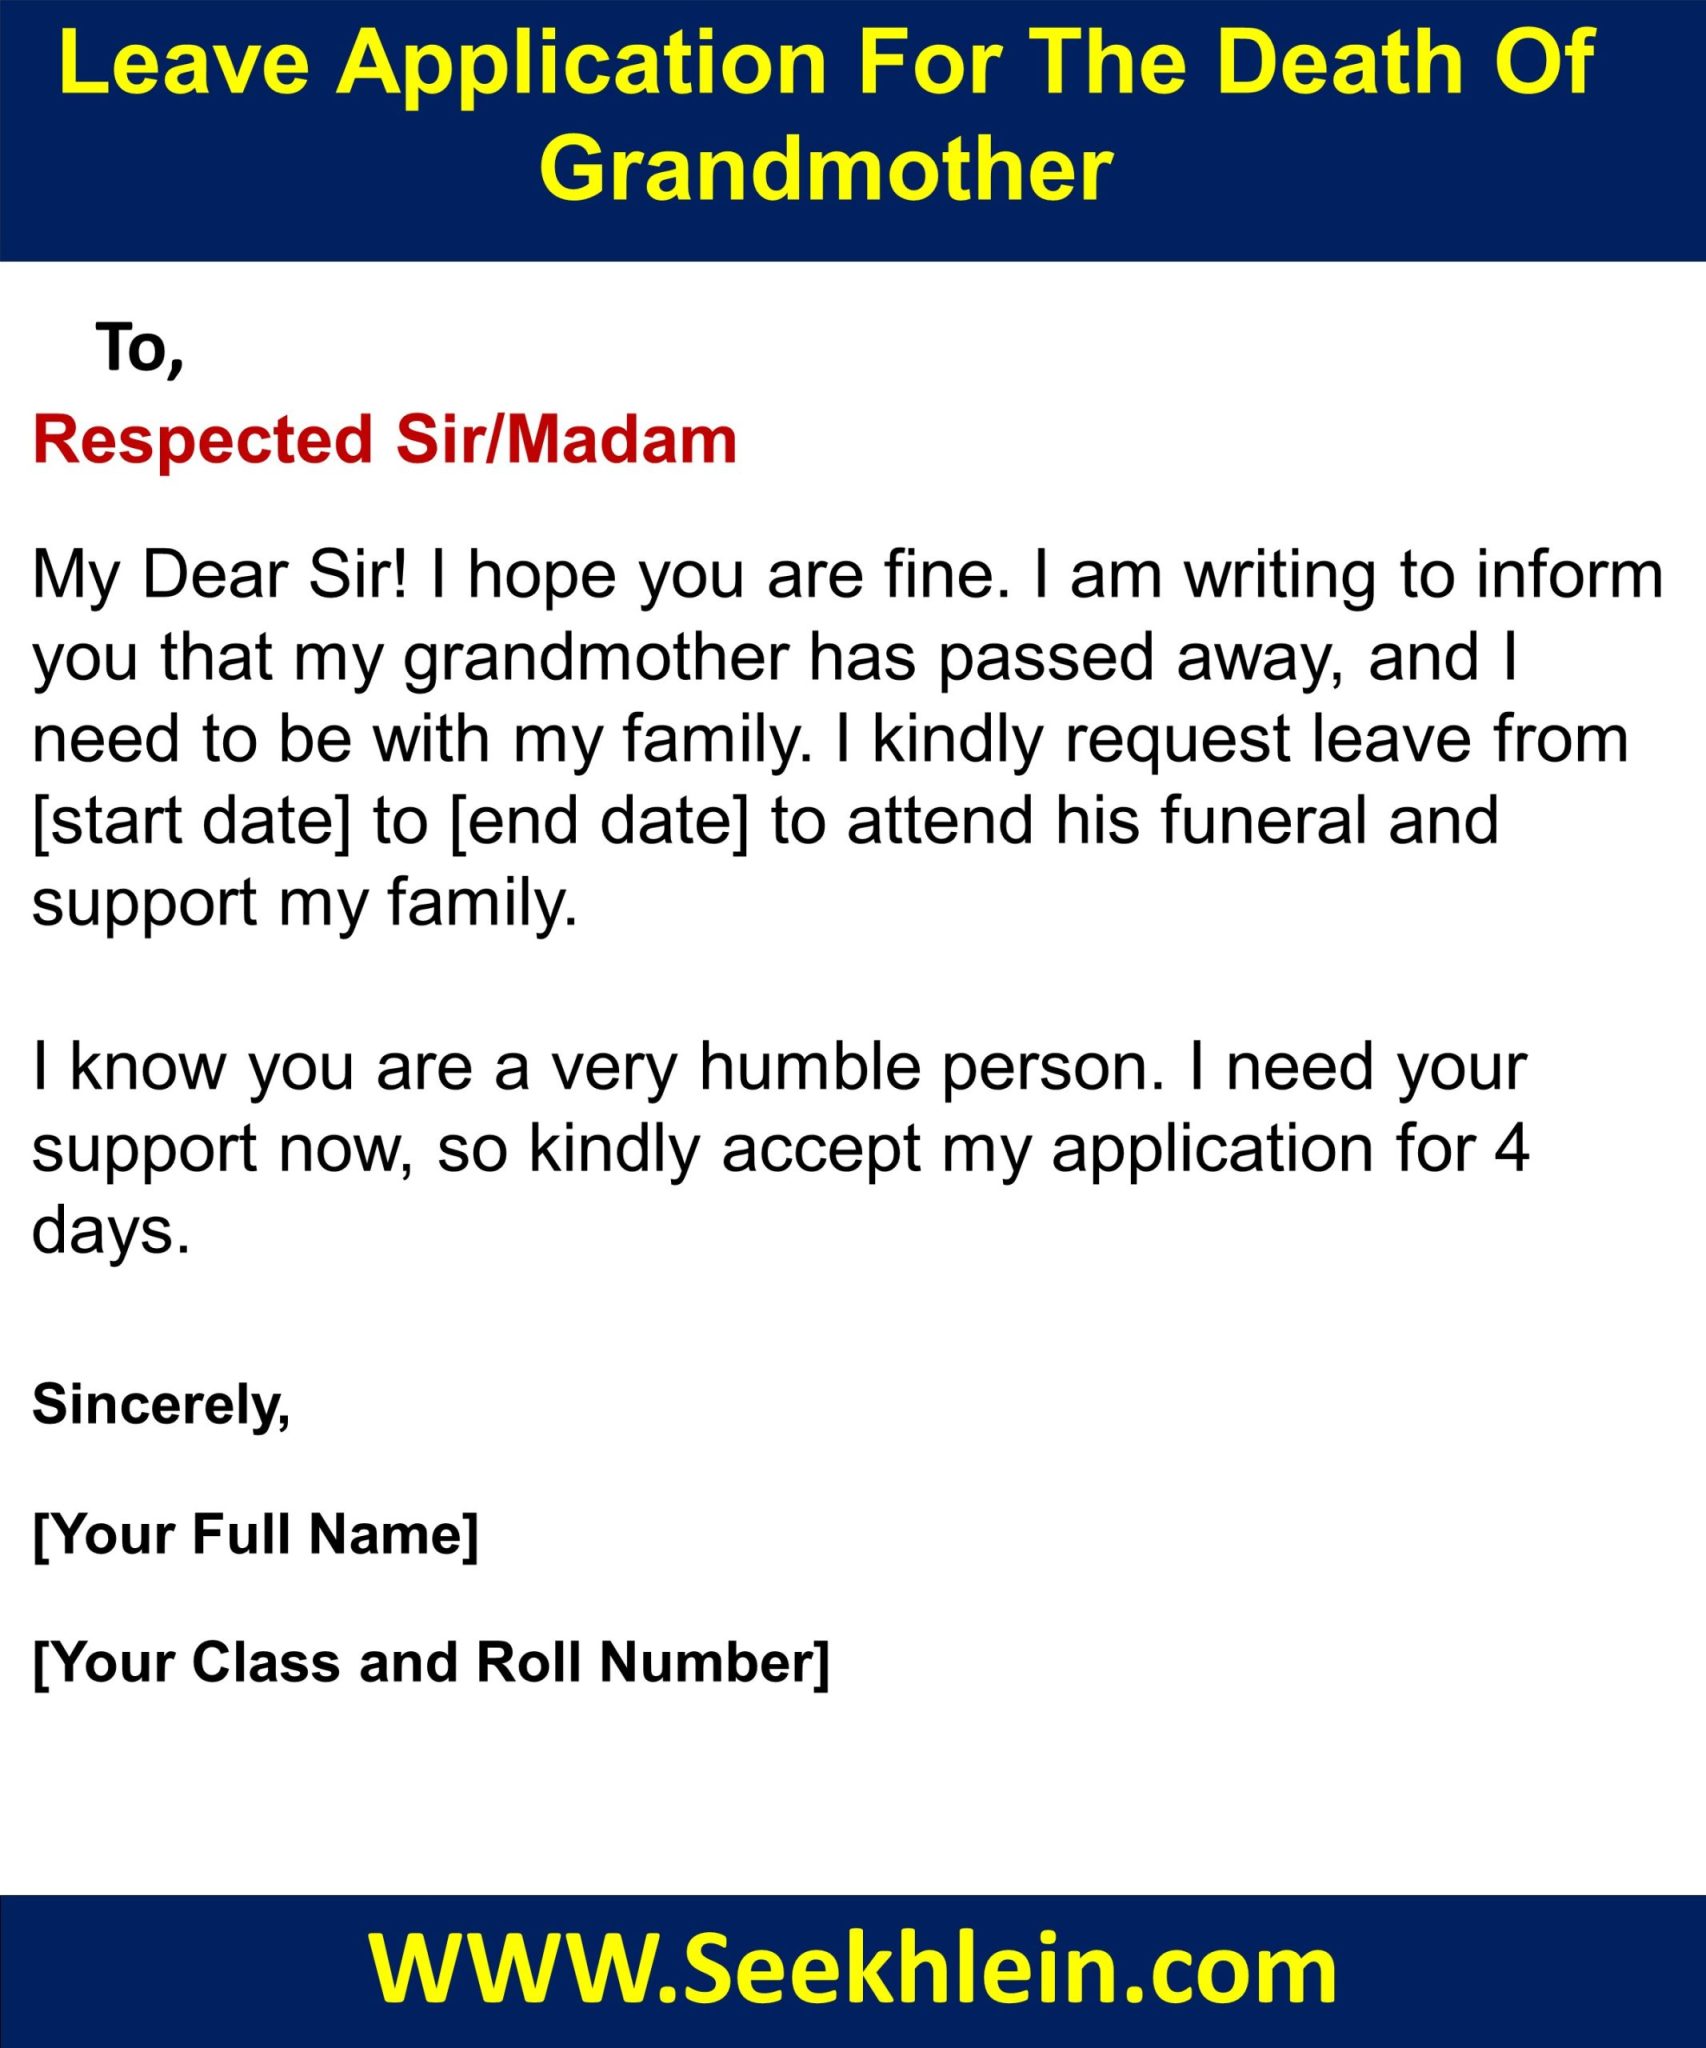 Leave Application For The Death Of Grandmother